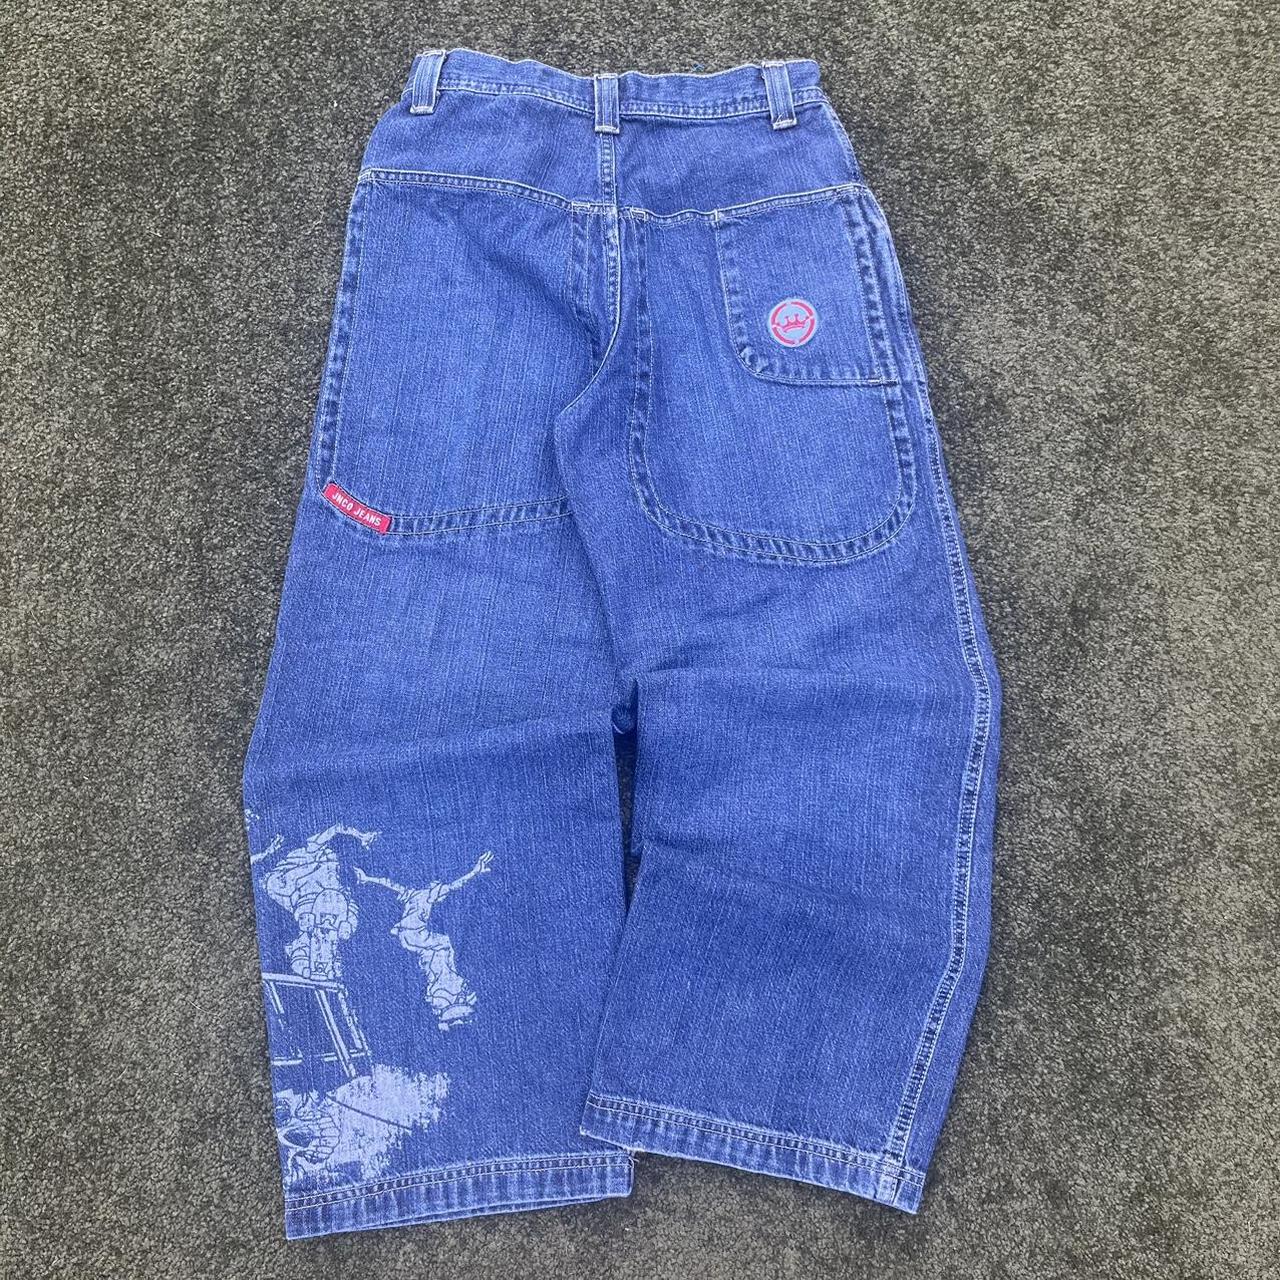 JNCO Men's Blue and Red Jeans | Depop